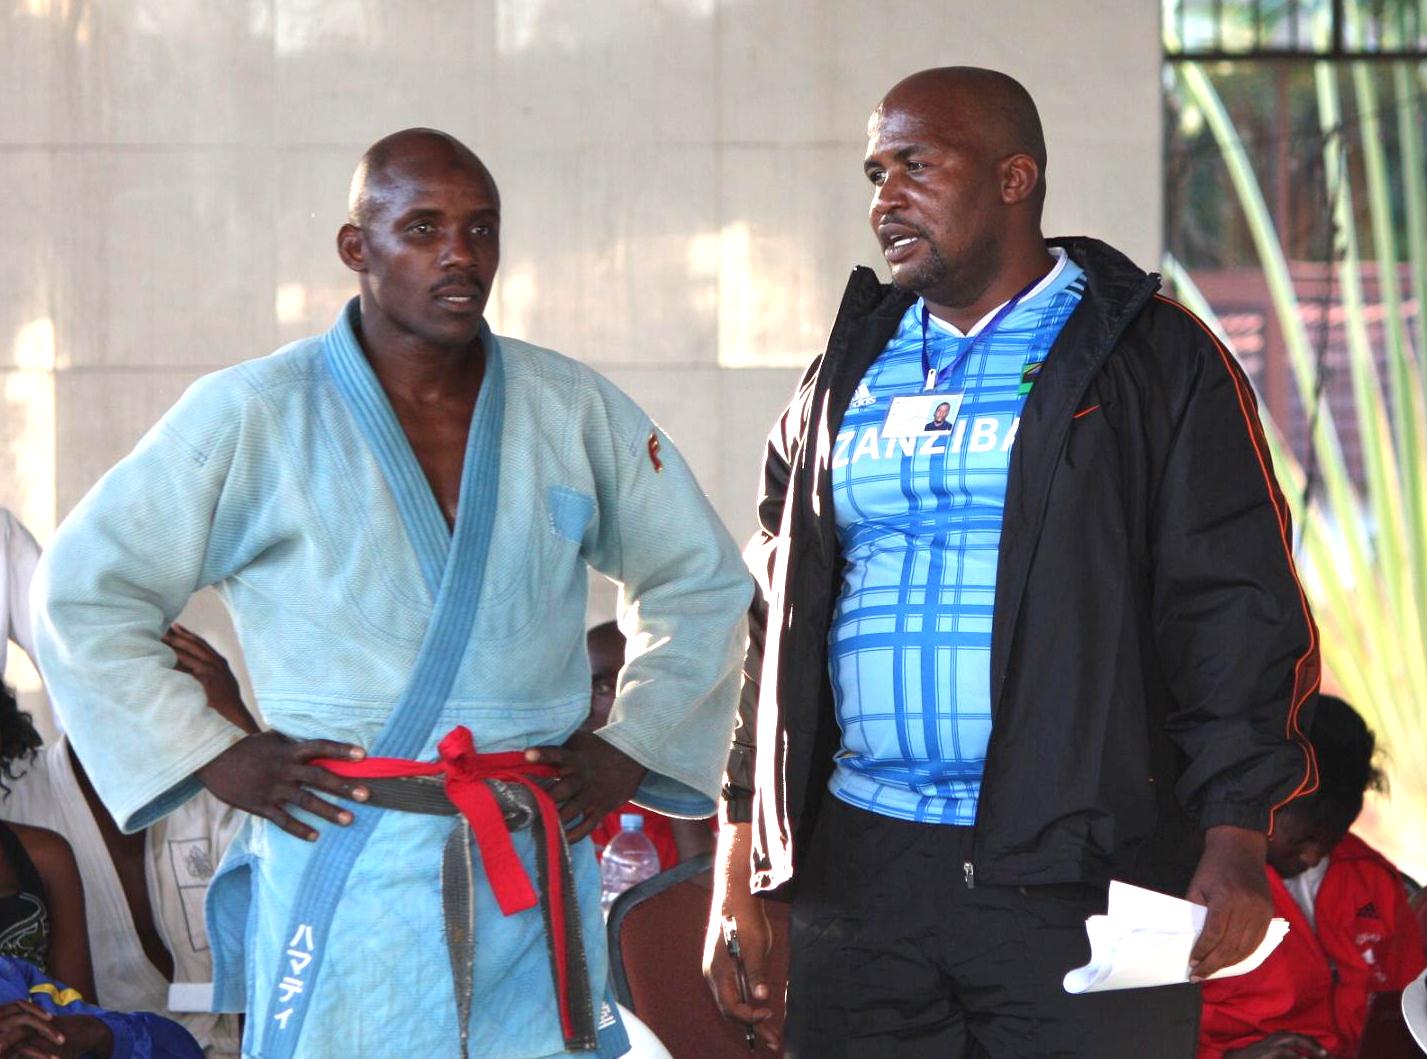 Pictures of the competition - The 5th East Africa Judo Championship 2011 -Men73kg～男子73kg級_a0088841_12301257.jpg